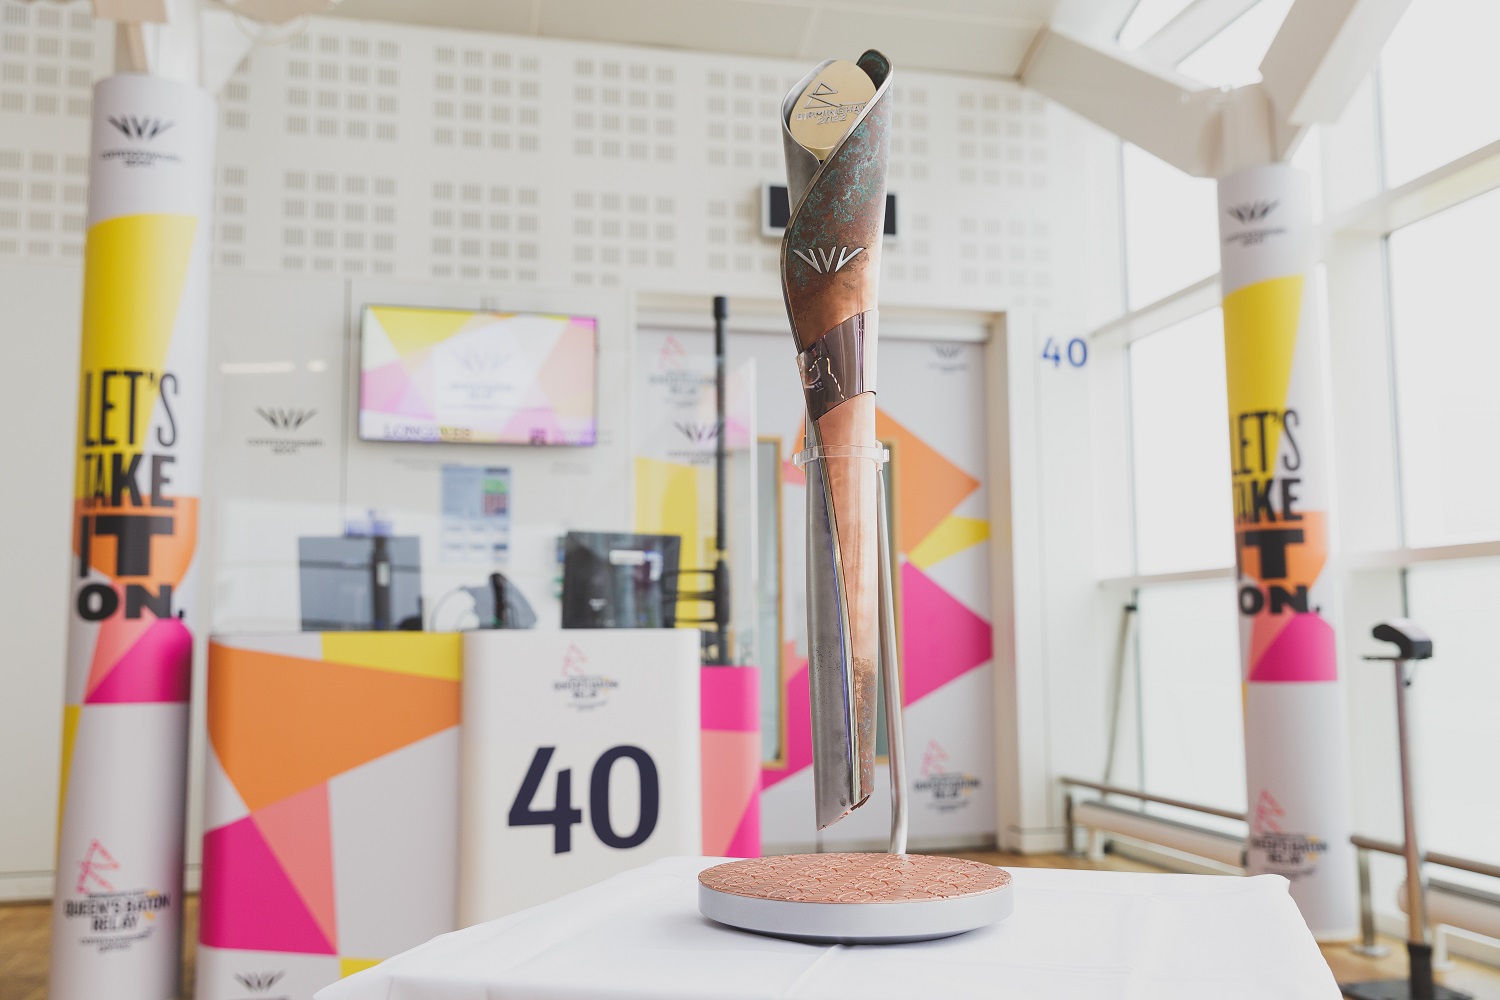 2021-10/today-the-queen-s-baton-relay-started-its-epic-journey-across-the-globe-as-the-baton-departed-from-birmingham-airport-to-cyprus-the-first-stop-on-the-140-000-kilometre-relay